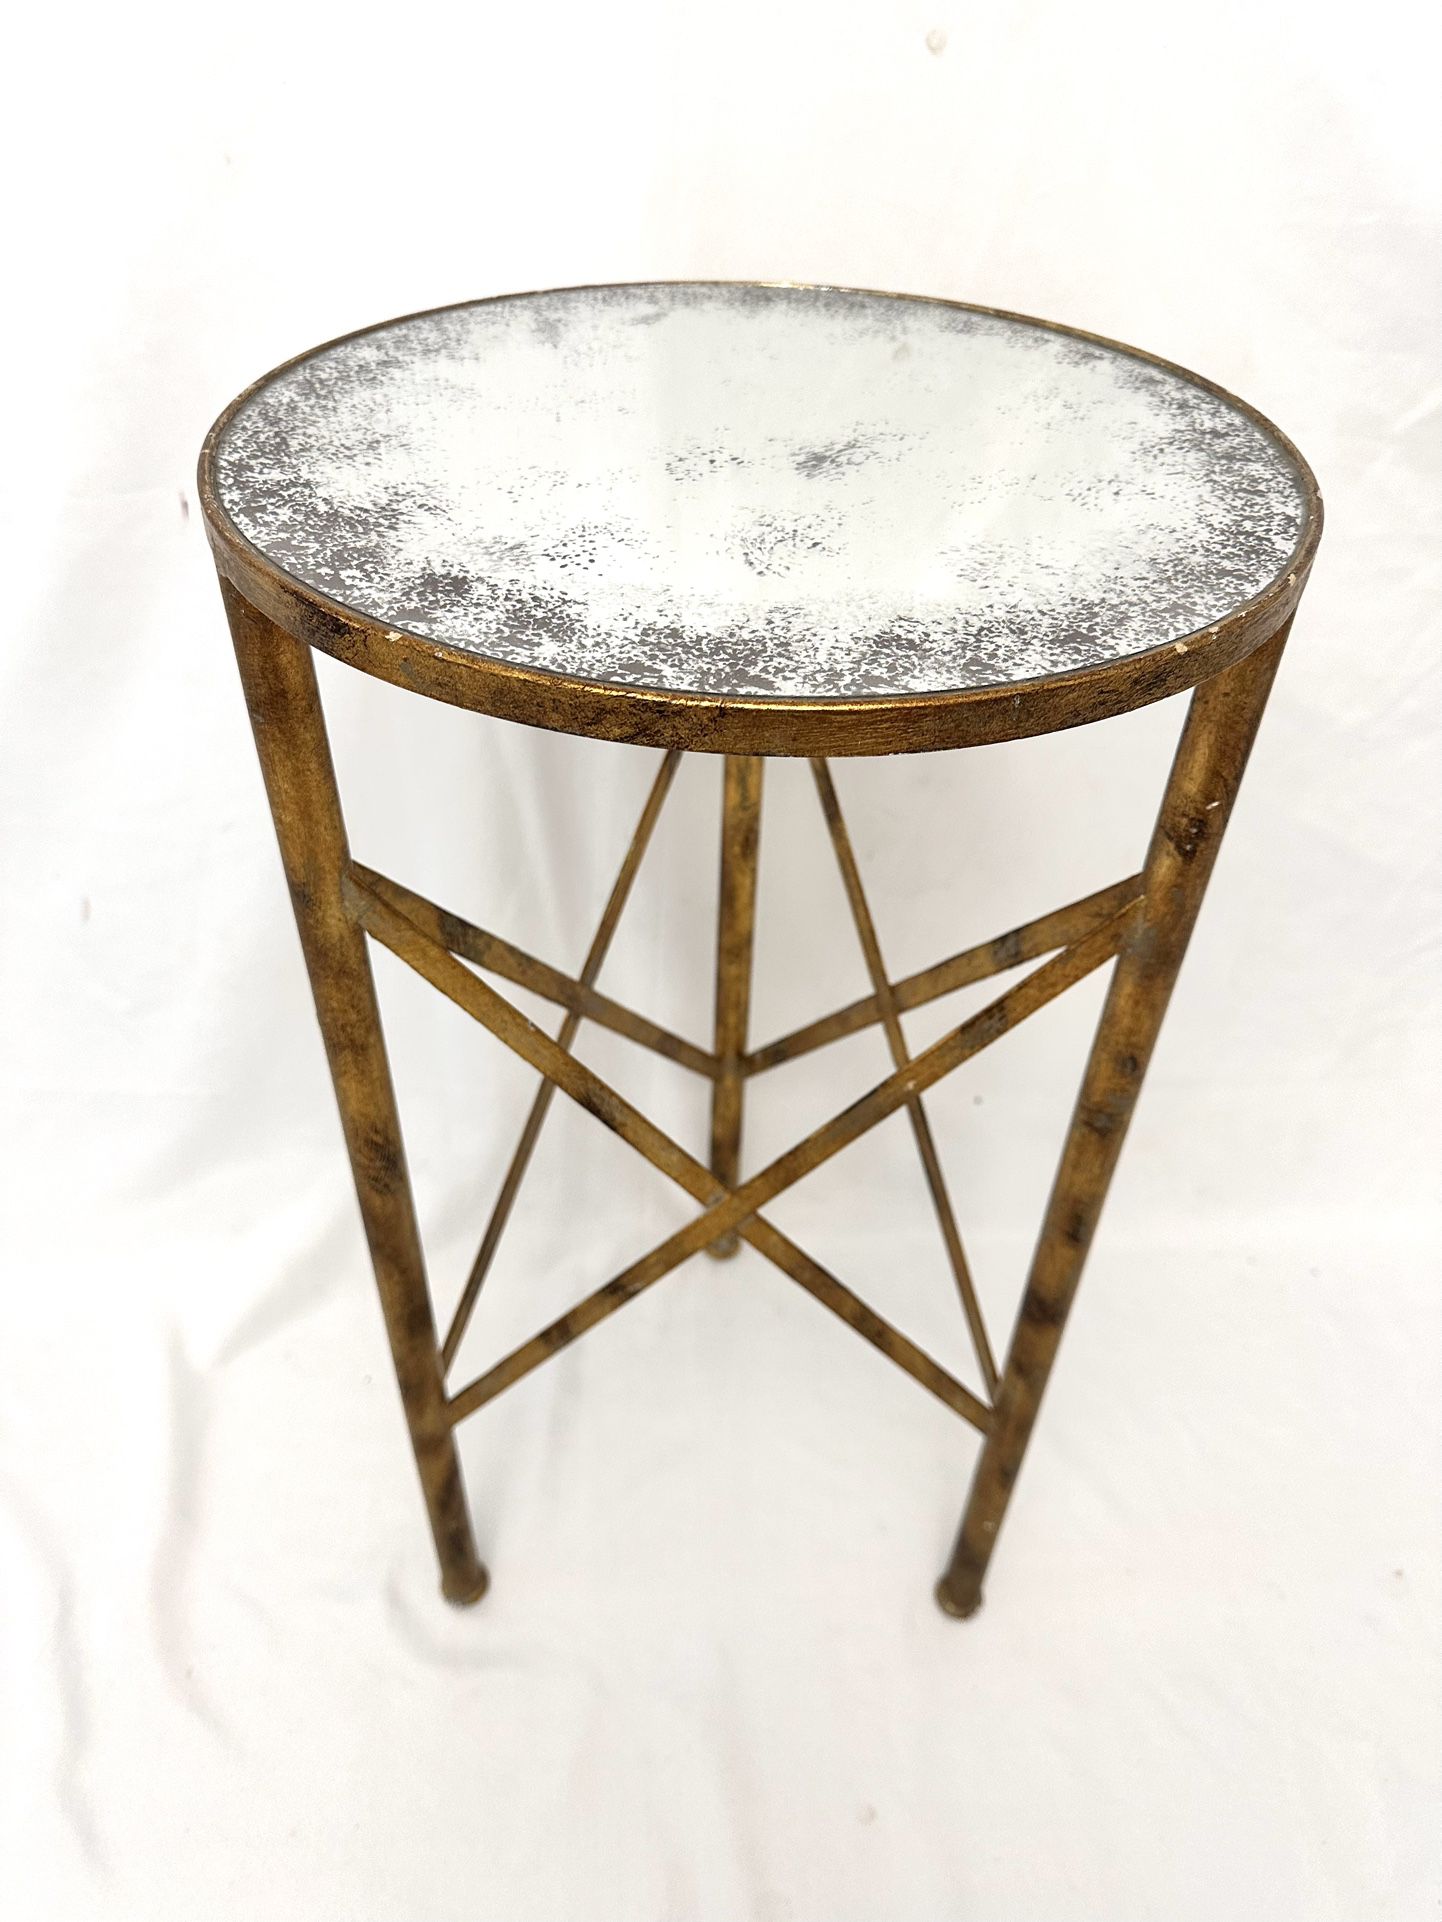 OLD WORLD DESIGN THREE LEGGED ACCENT TABLE - EXCELLENT CONDITION!